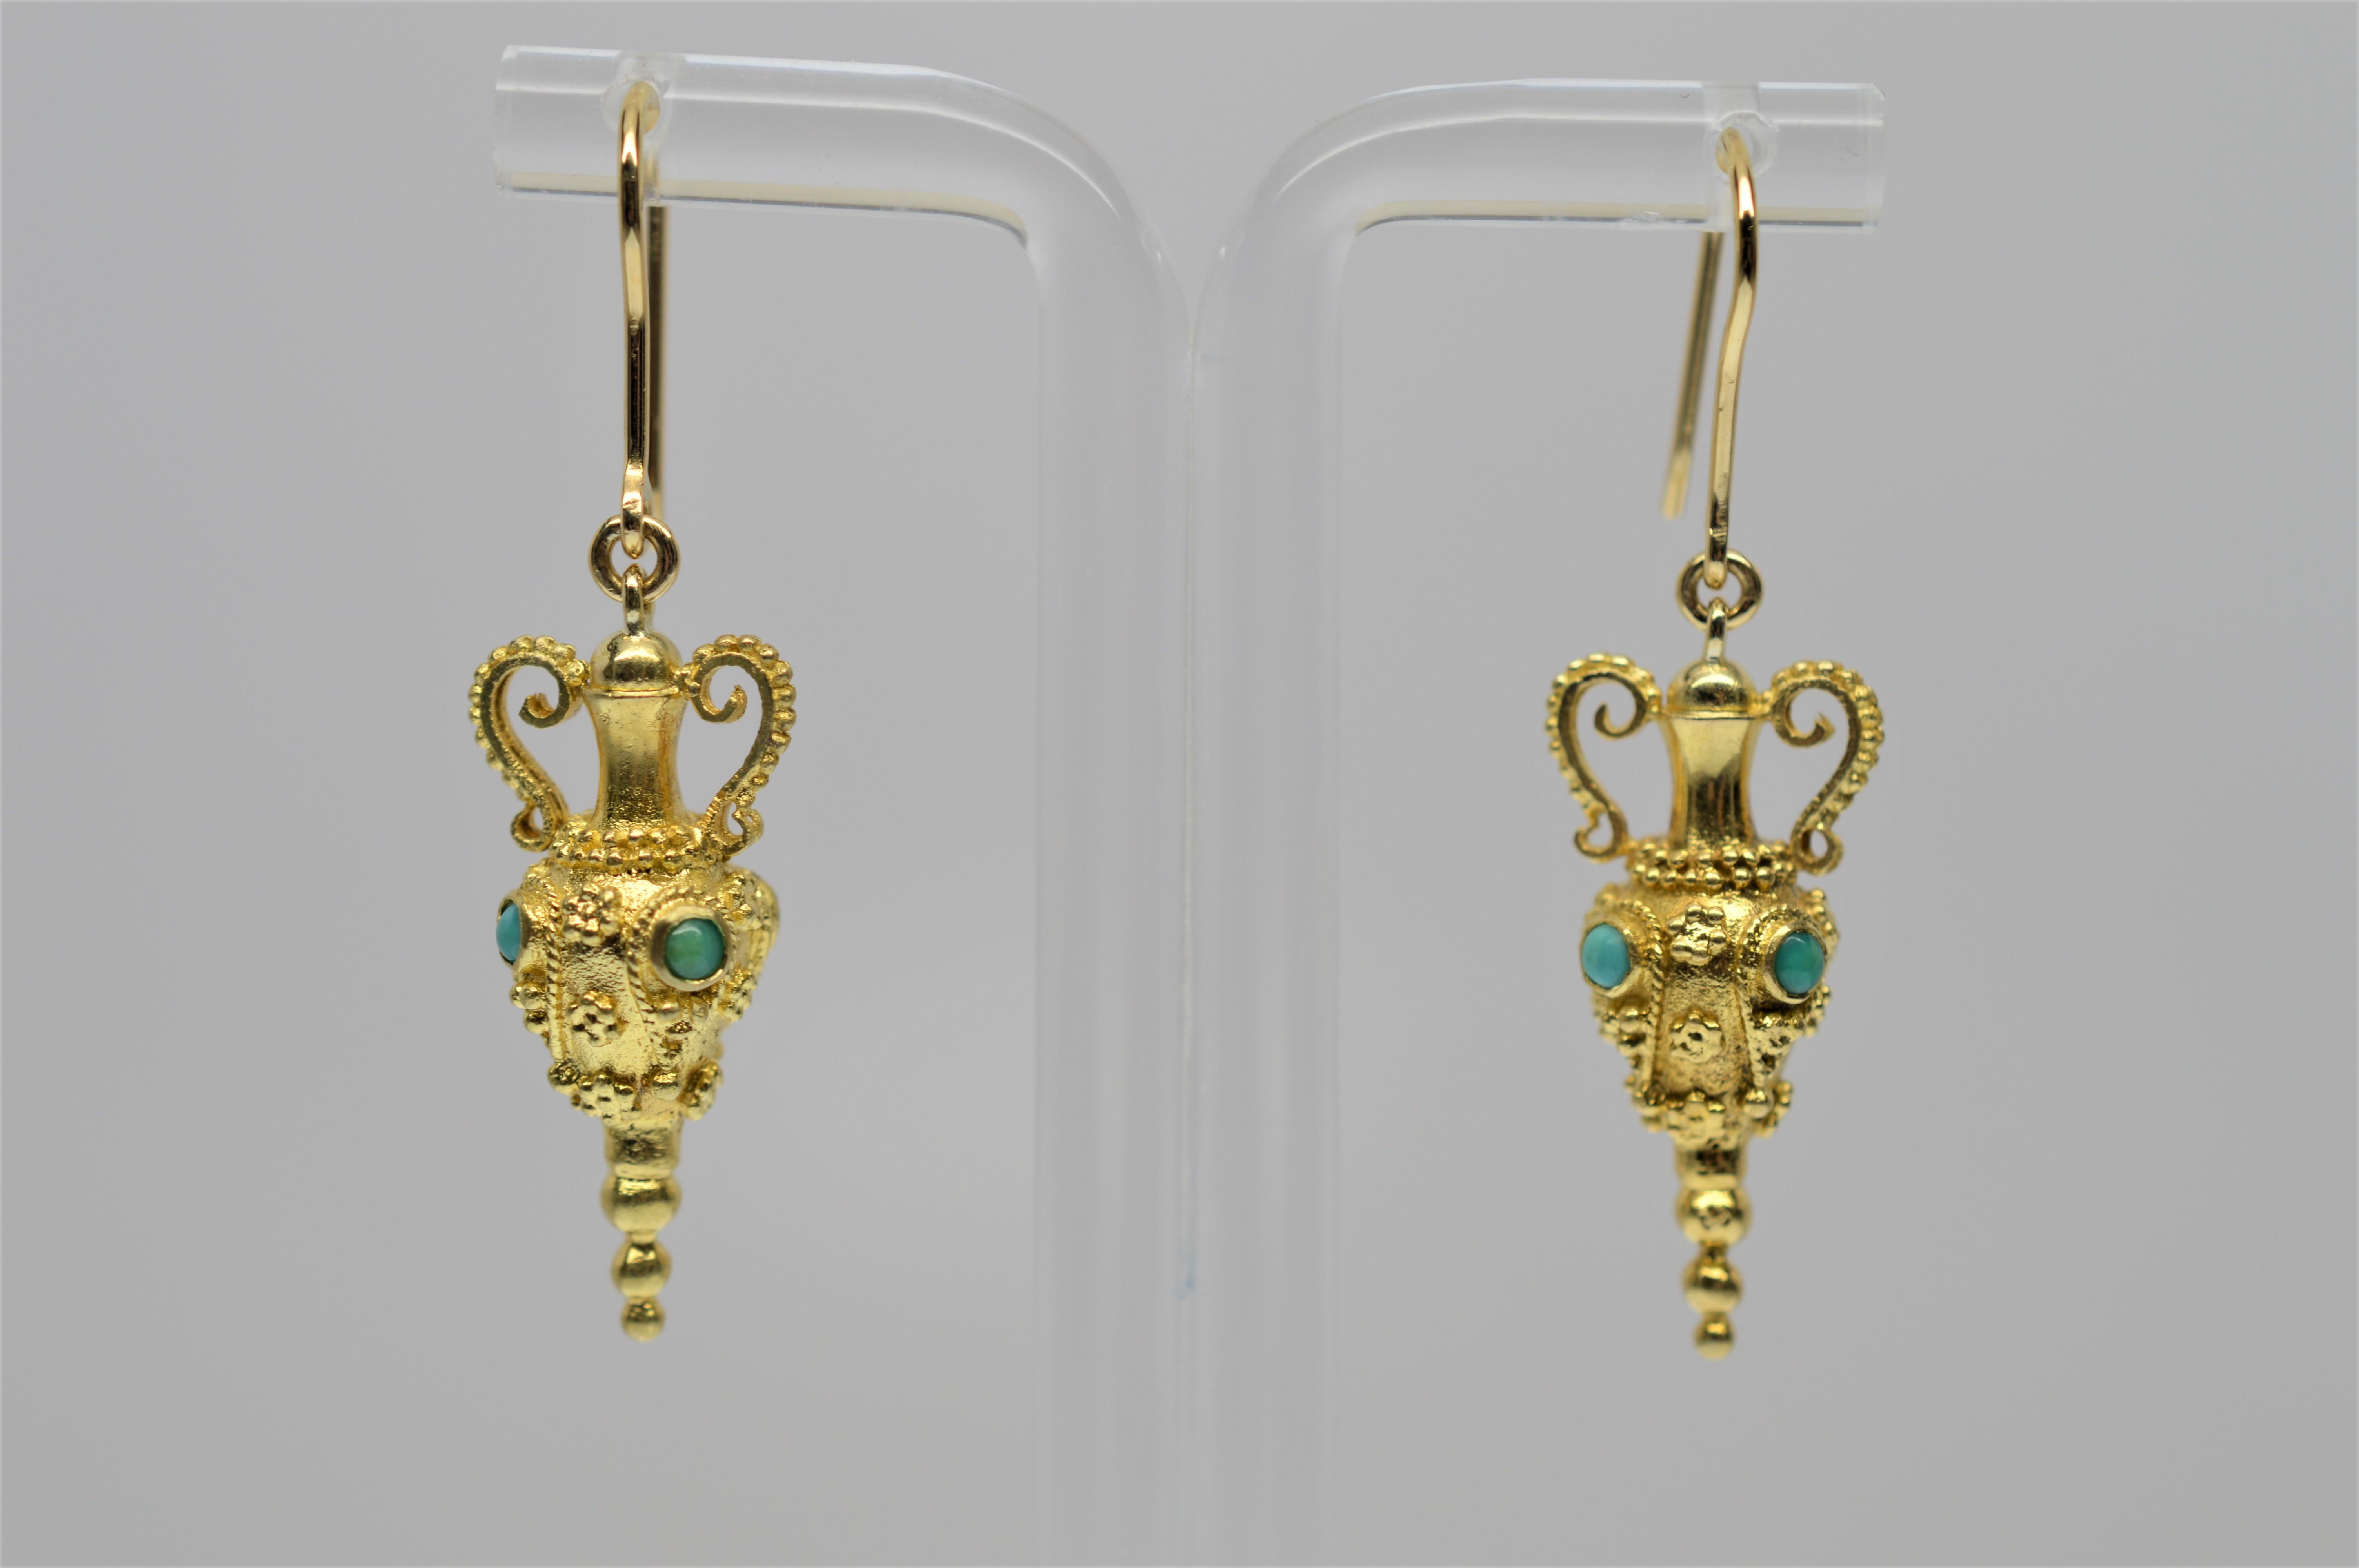 Exotic 18 Karat Yellow Gold Urn Drop Earrings with Turquoise Accents.  These ornate gold drop earrings artistically display in detail, miniature urn-shaped charms accented with dark and light turquoise stones and measures 1-1/4 inch. Hanging from